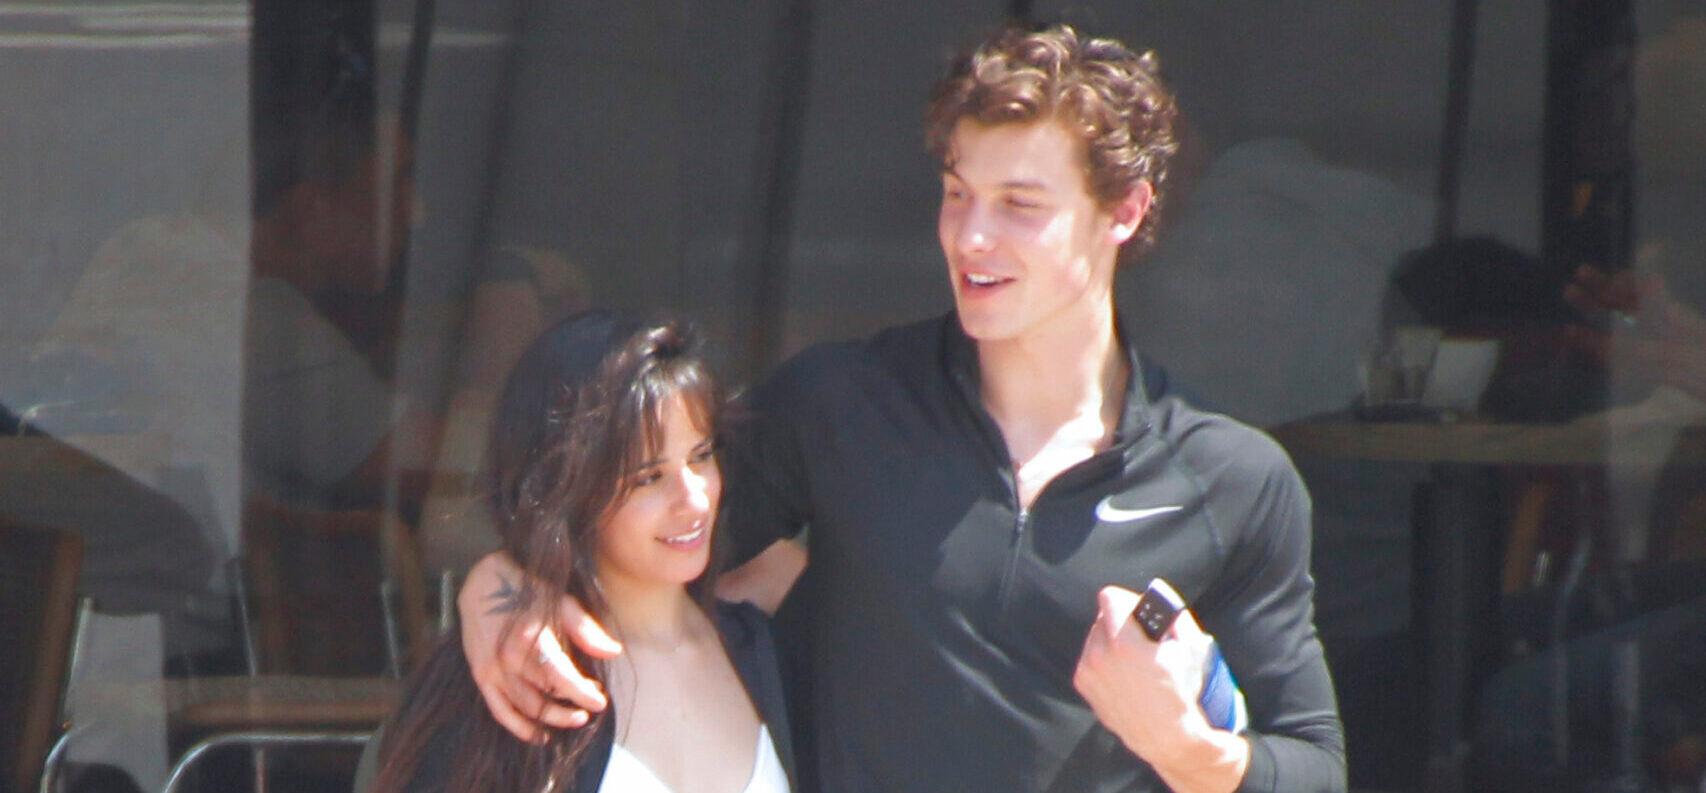 Shawn Mendes with arm around Camila Cabello